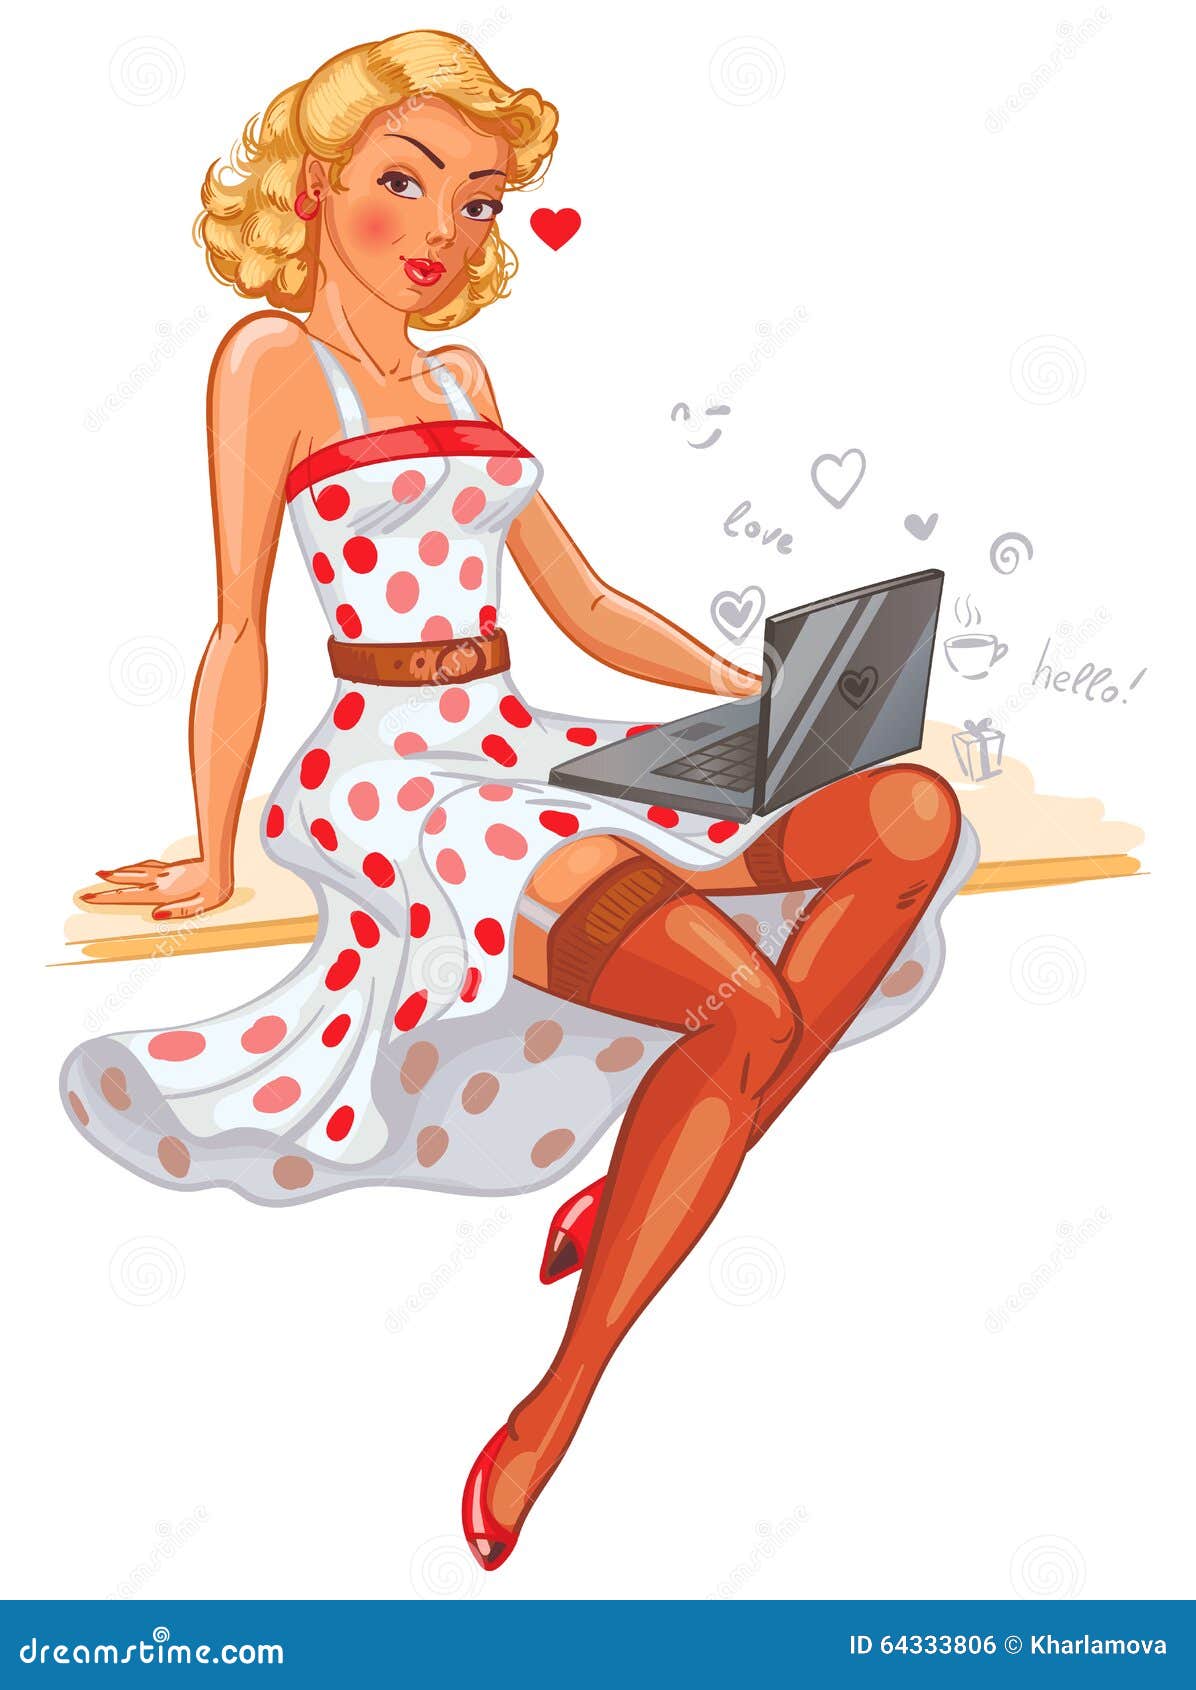 Pin Up Online